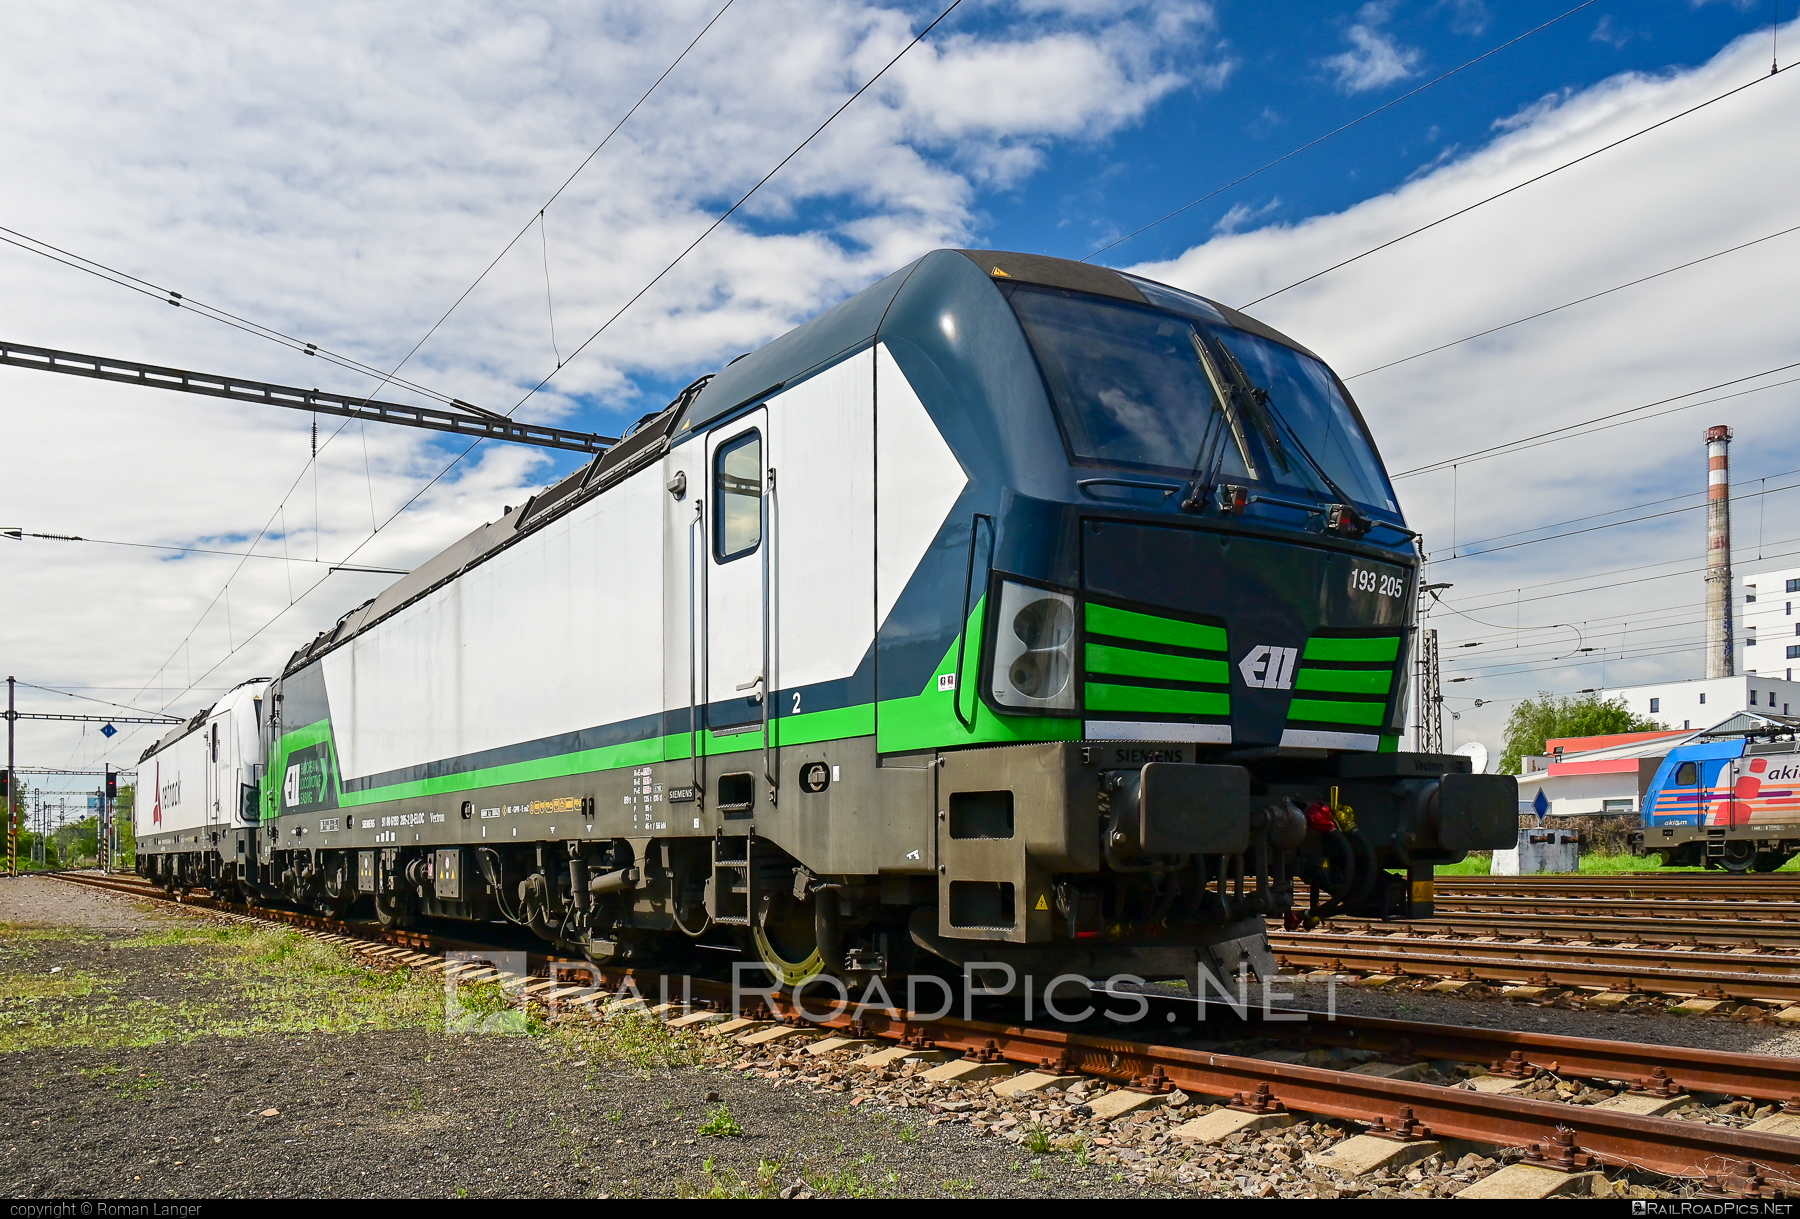 Siemens Vectron MS - 193 205 operated by Retrack GmbH & Co. KG #ell #ellgermany #eloc #europeanlocomotiveleasing #retrack #retrackgmbh #siemens #siemensVectron #siemensVectronMS #vectron #vectronMS